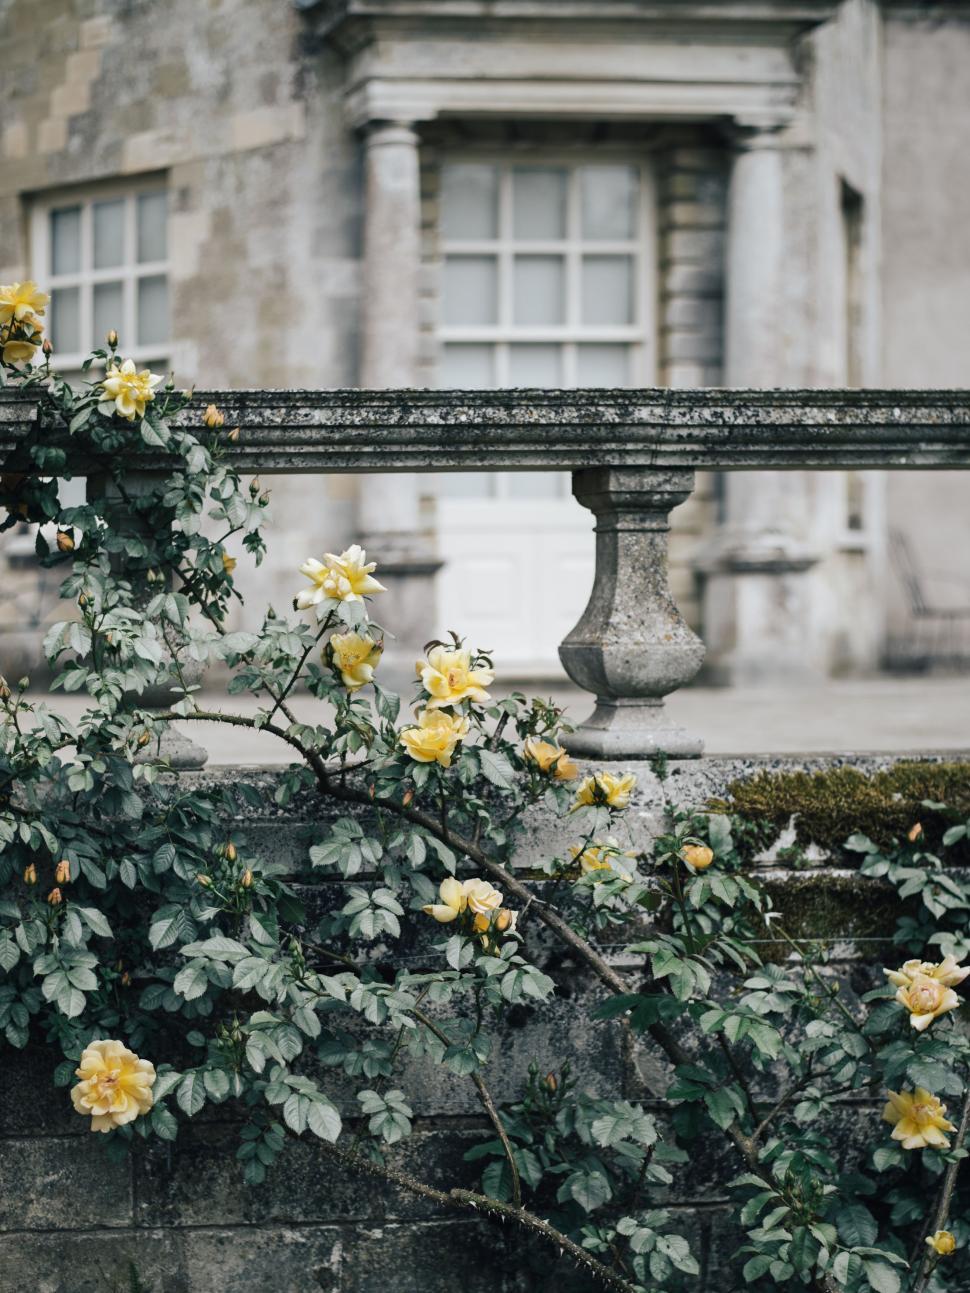 Free Image of Yellow Flowers Growing on the Side of a Building 